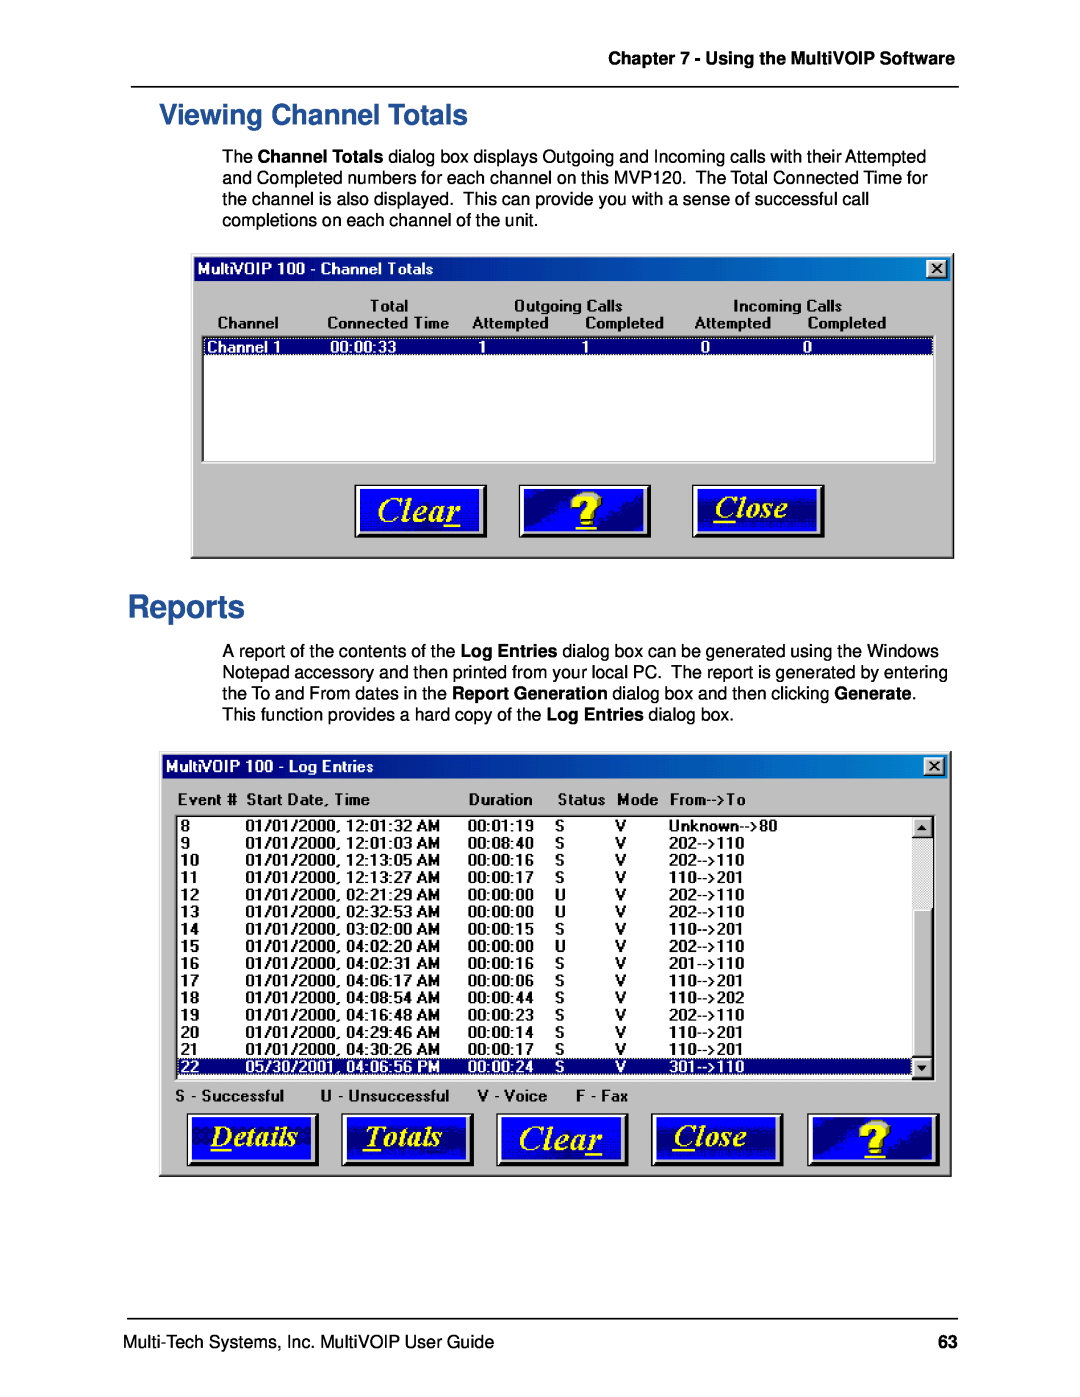 Multi-Tech Systems MVP120 manual Reports, Viewing Channel Totals, Using the MultiVOIP Software 